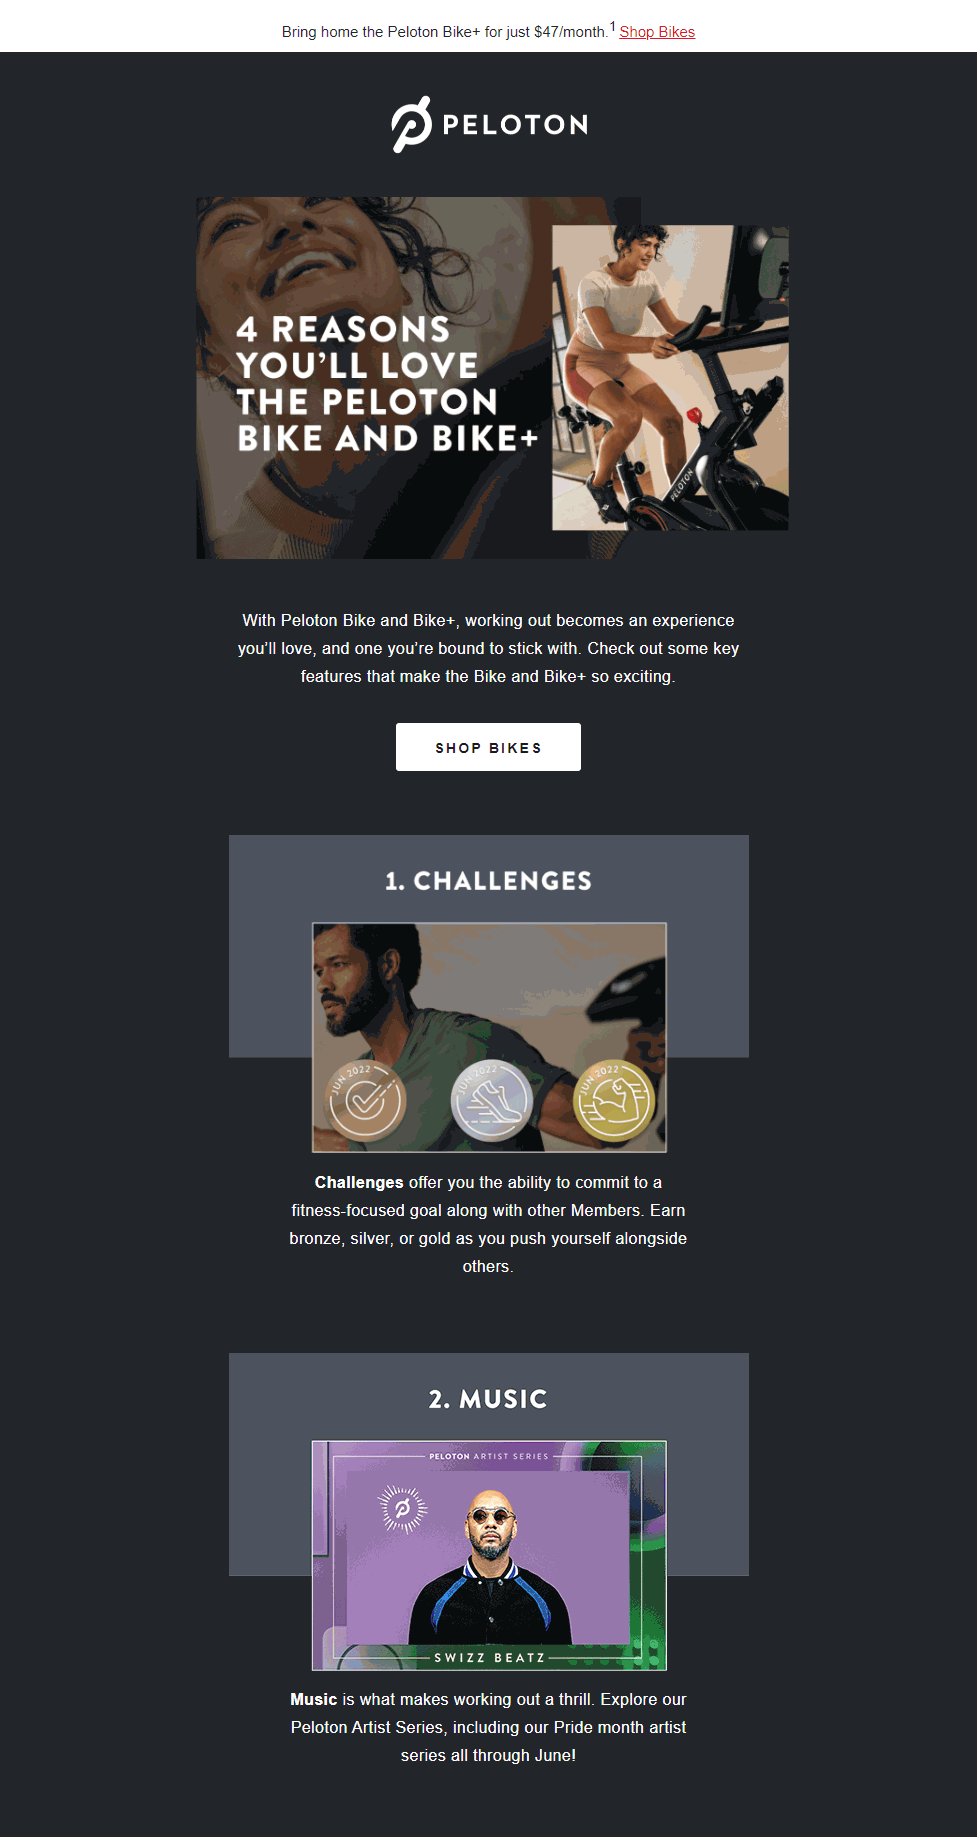 Email copy by Peloton